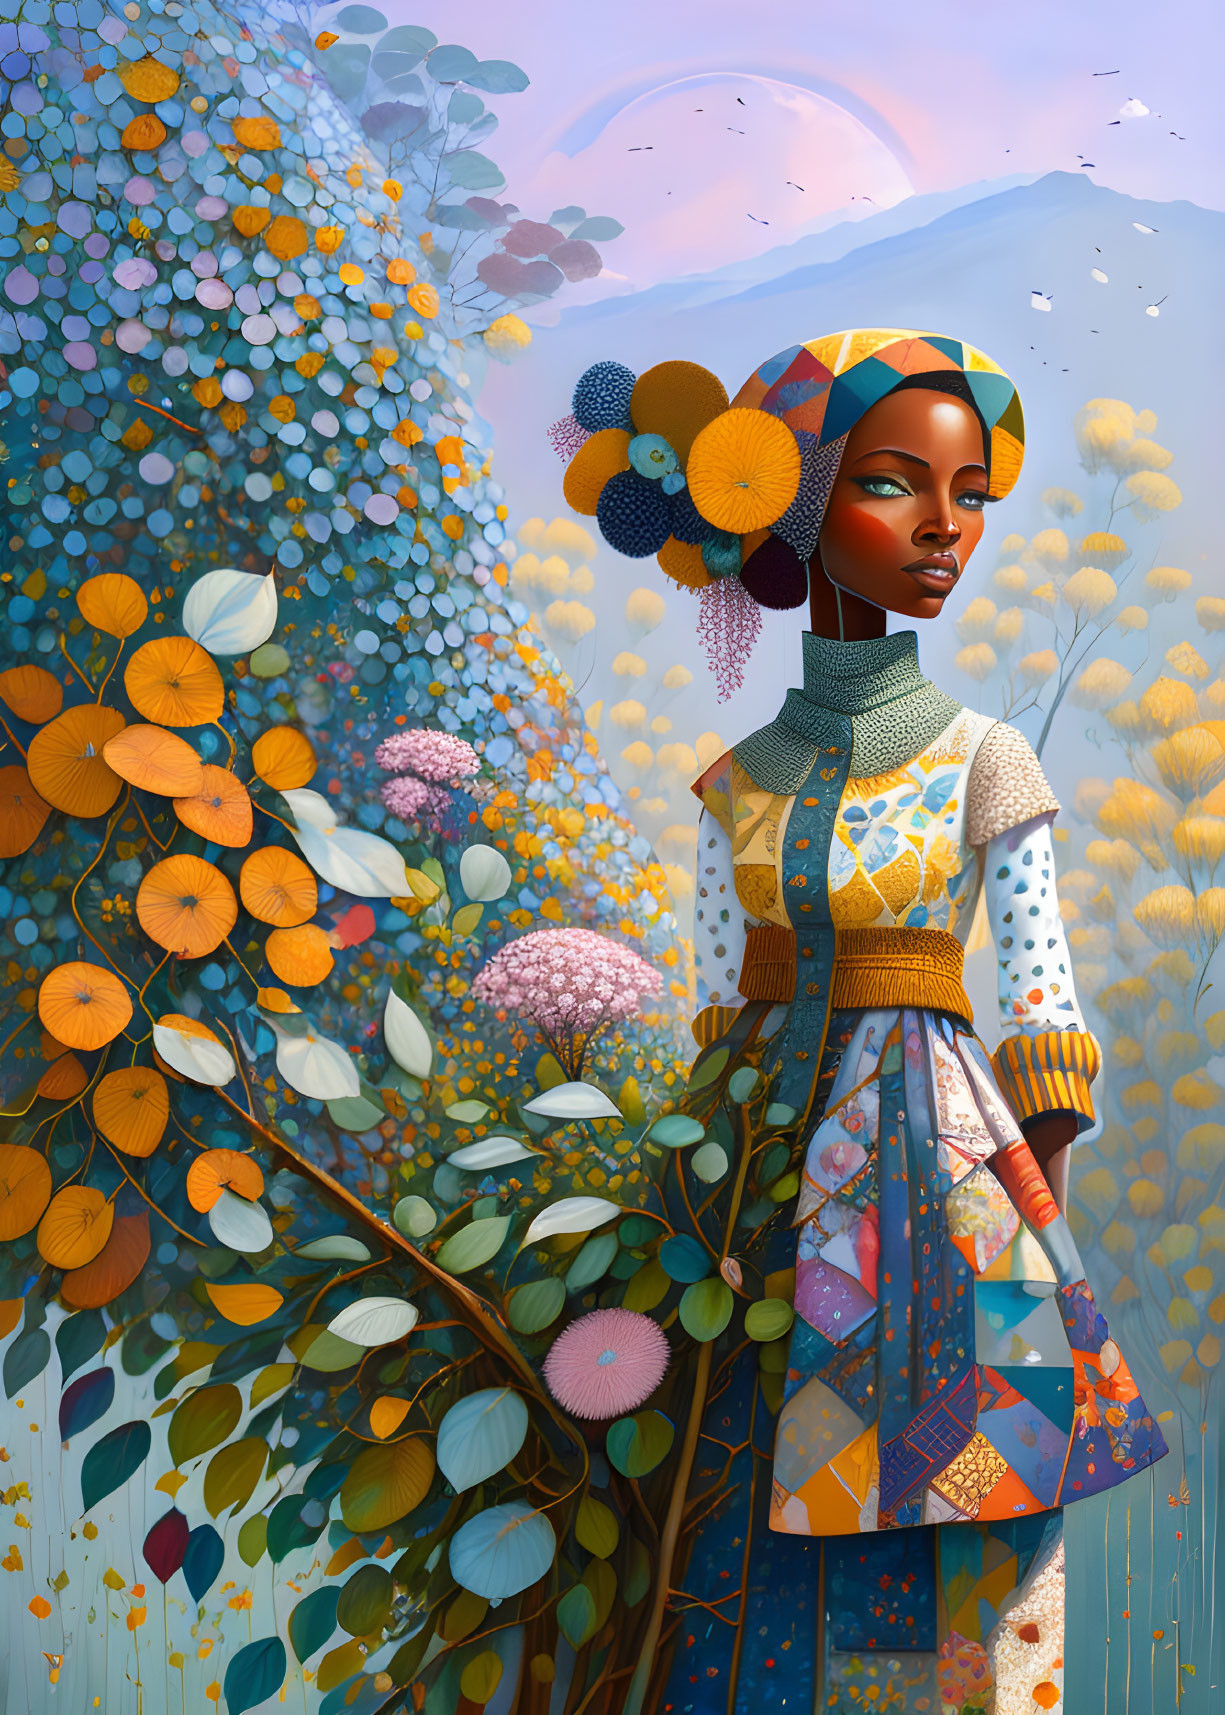 Colorful Patchwork Dress Woman Illustration Among Vibrant Flora and Balloons